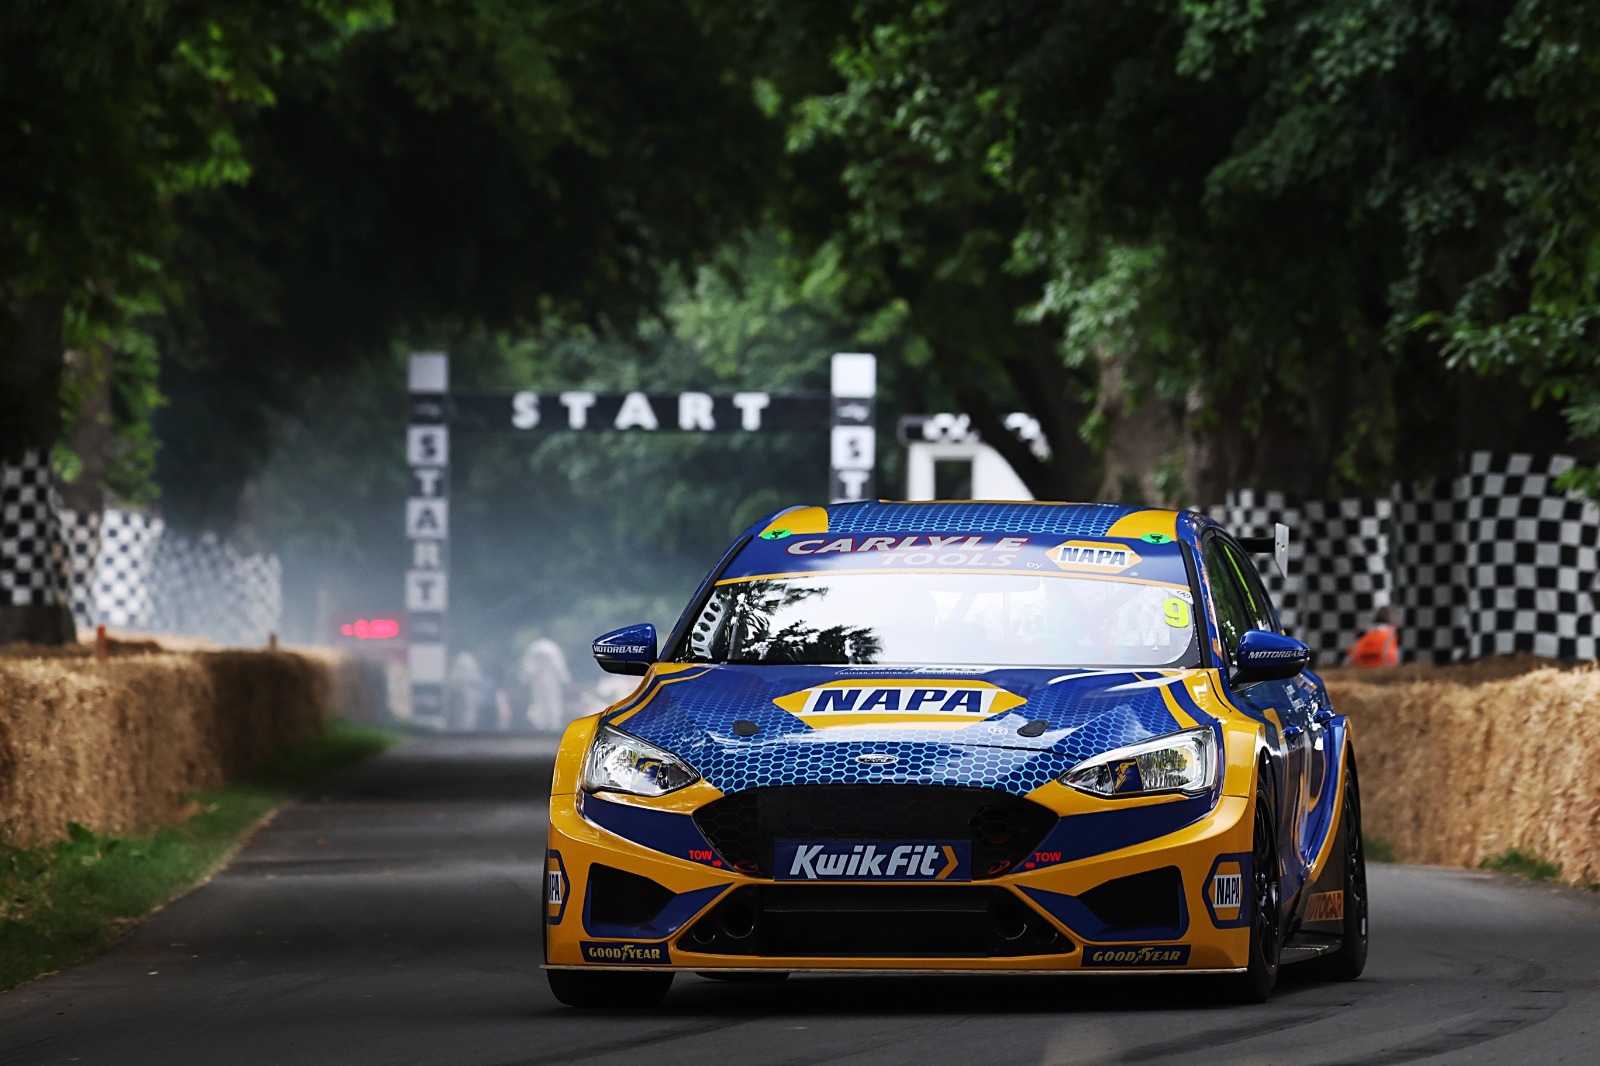 The NAPA Racing UK car in front of the start line at Goodwood Festival of Speed's famous Hillclimb.